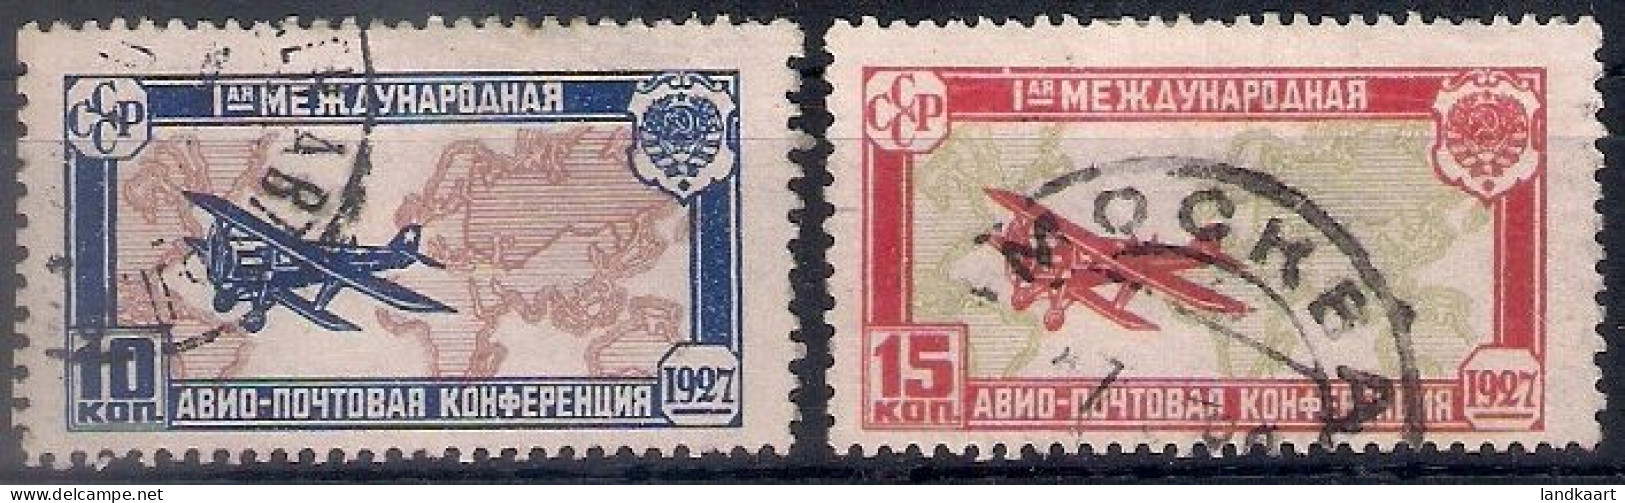 Russia 1927, Michel Nr 326-27, Used - Used Stamps